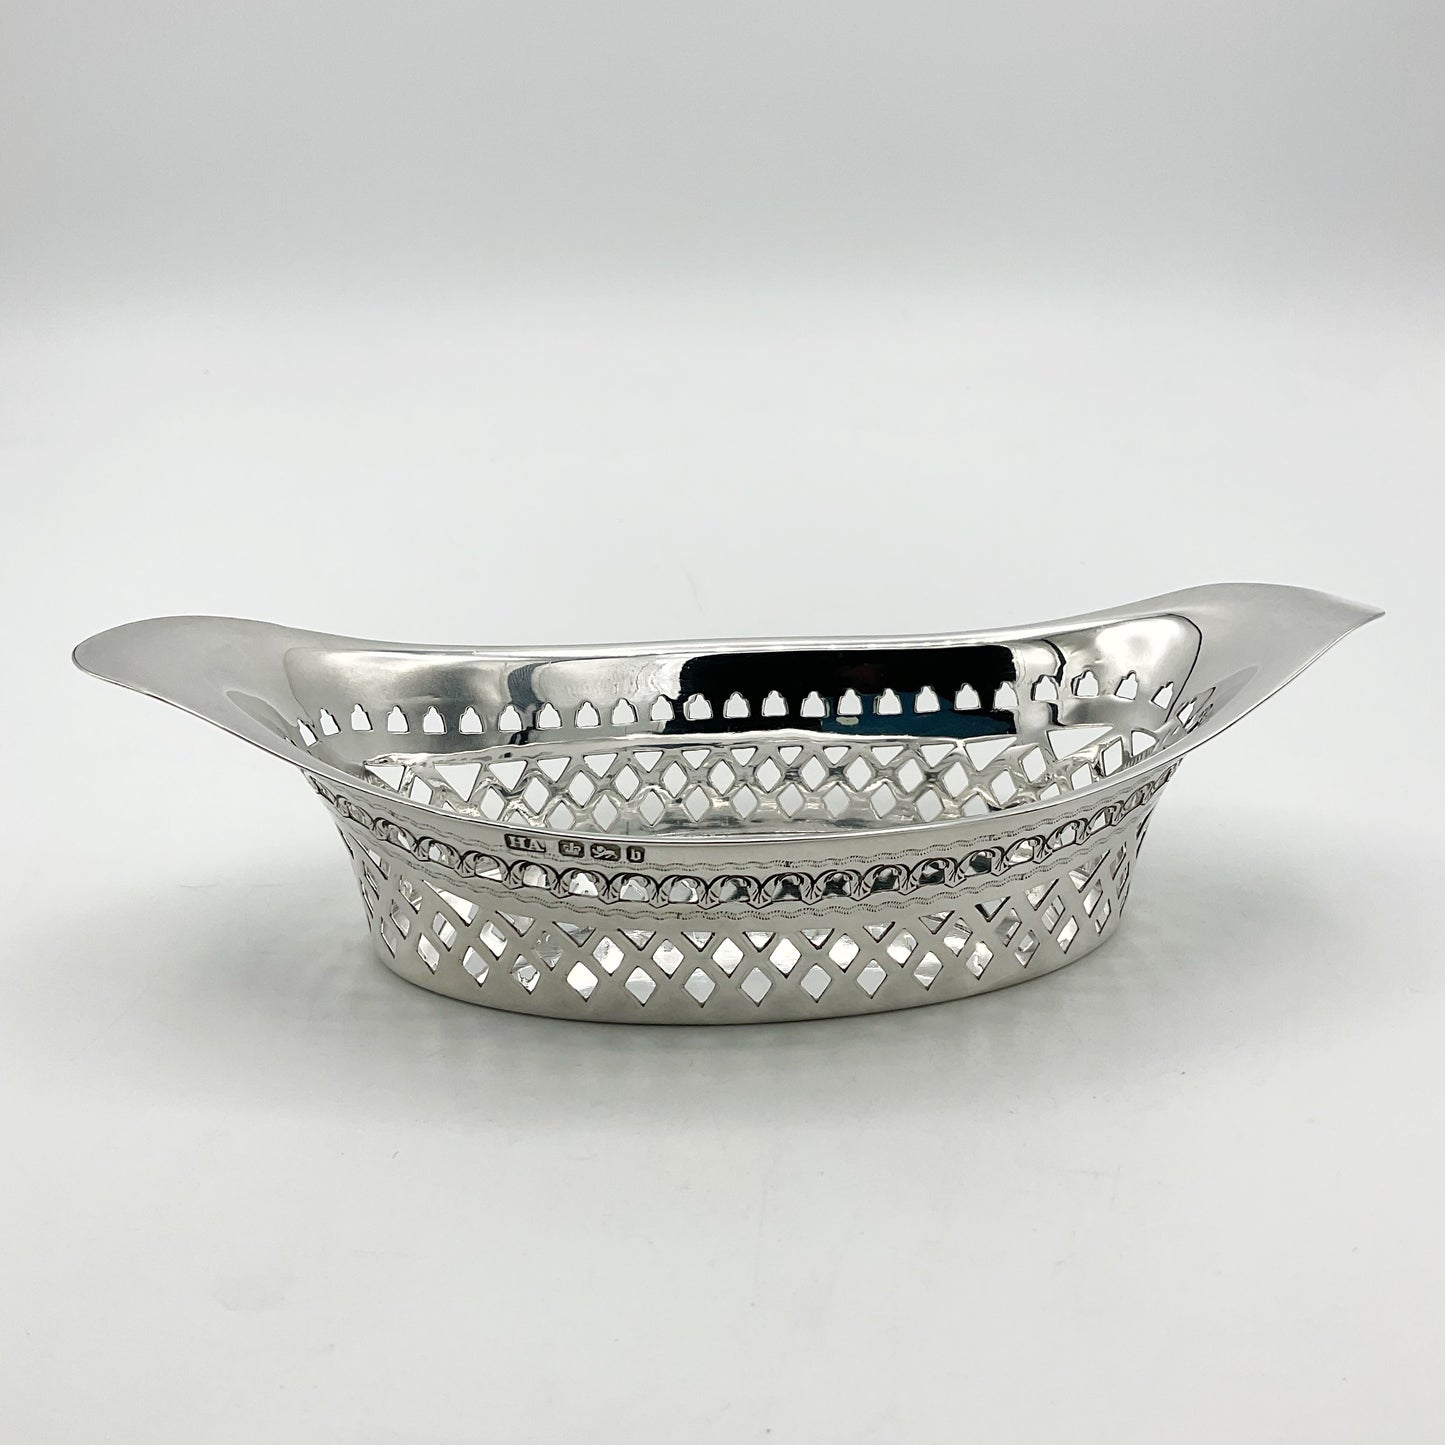 Antique Silver pierced bowl with hallmarks on white background 